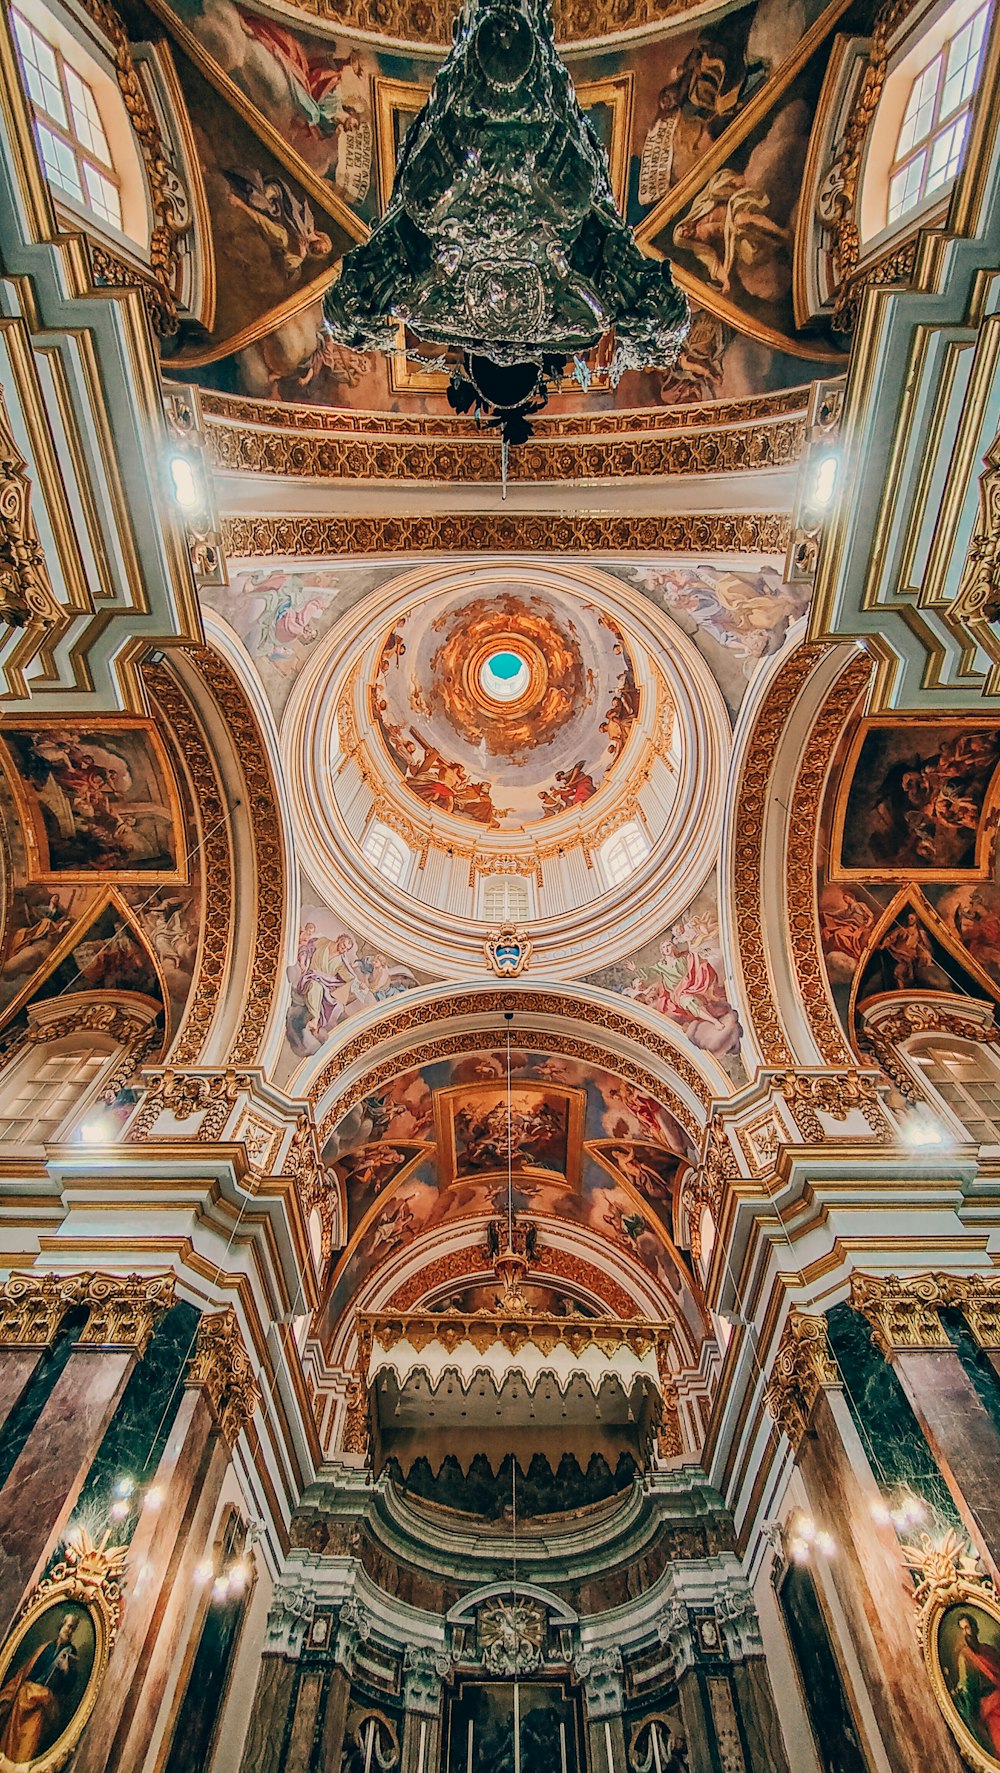 the ceiling of a church with a large dome